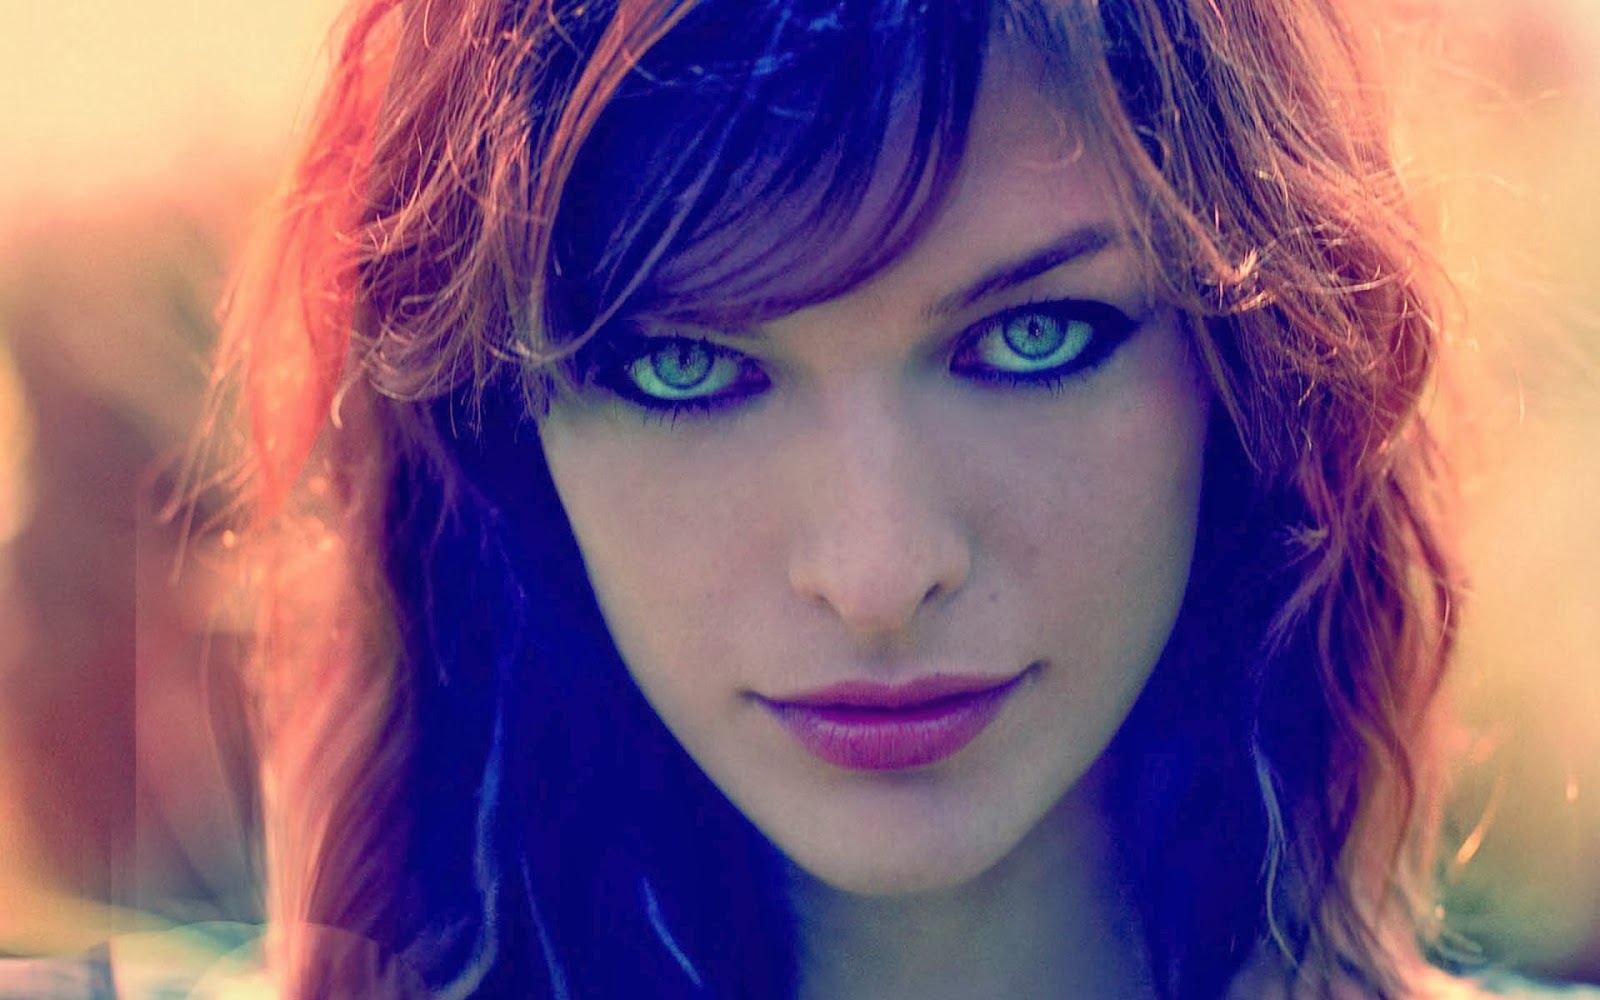 Acidemic Film Milla Jovovich God S Own Avatar Laymen Guide To